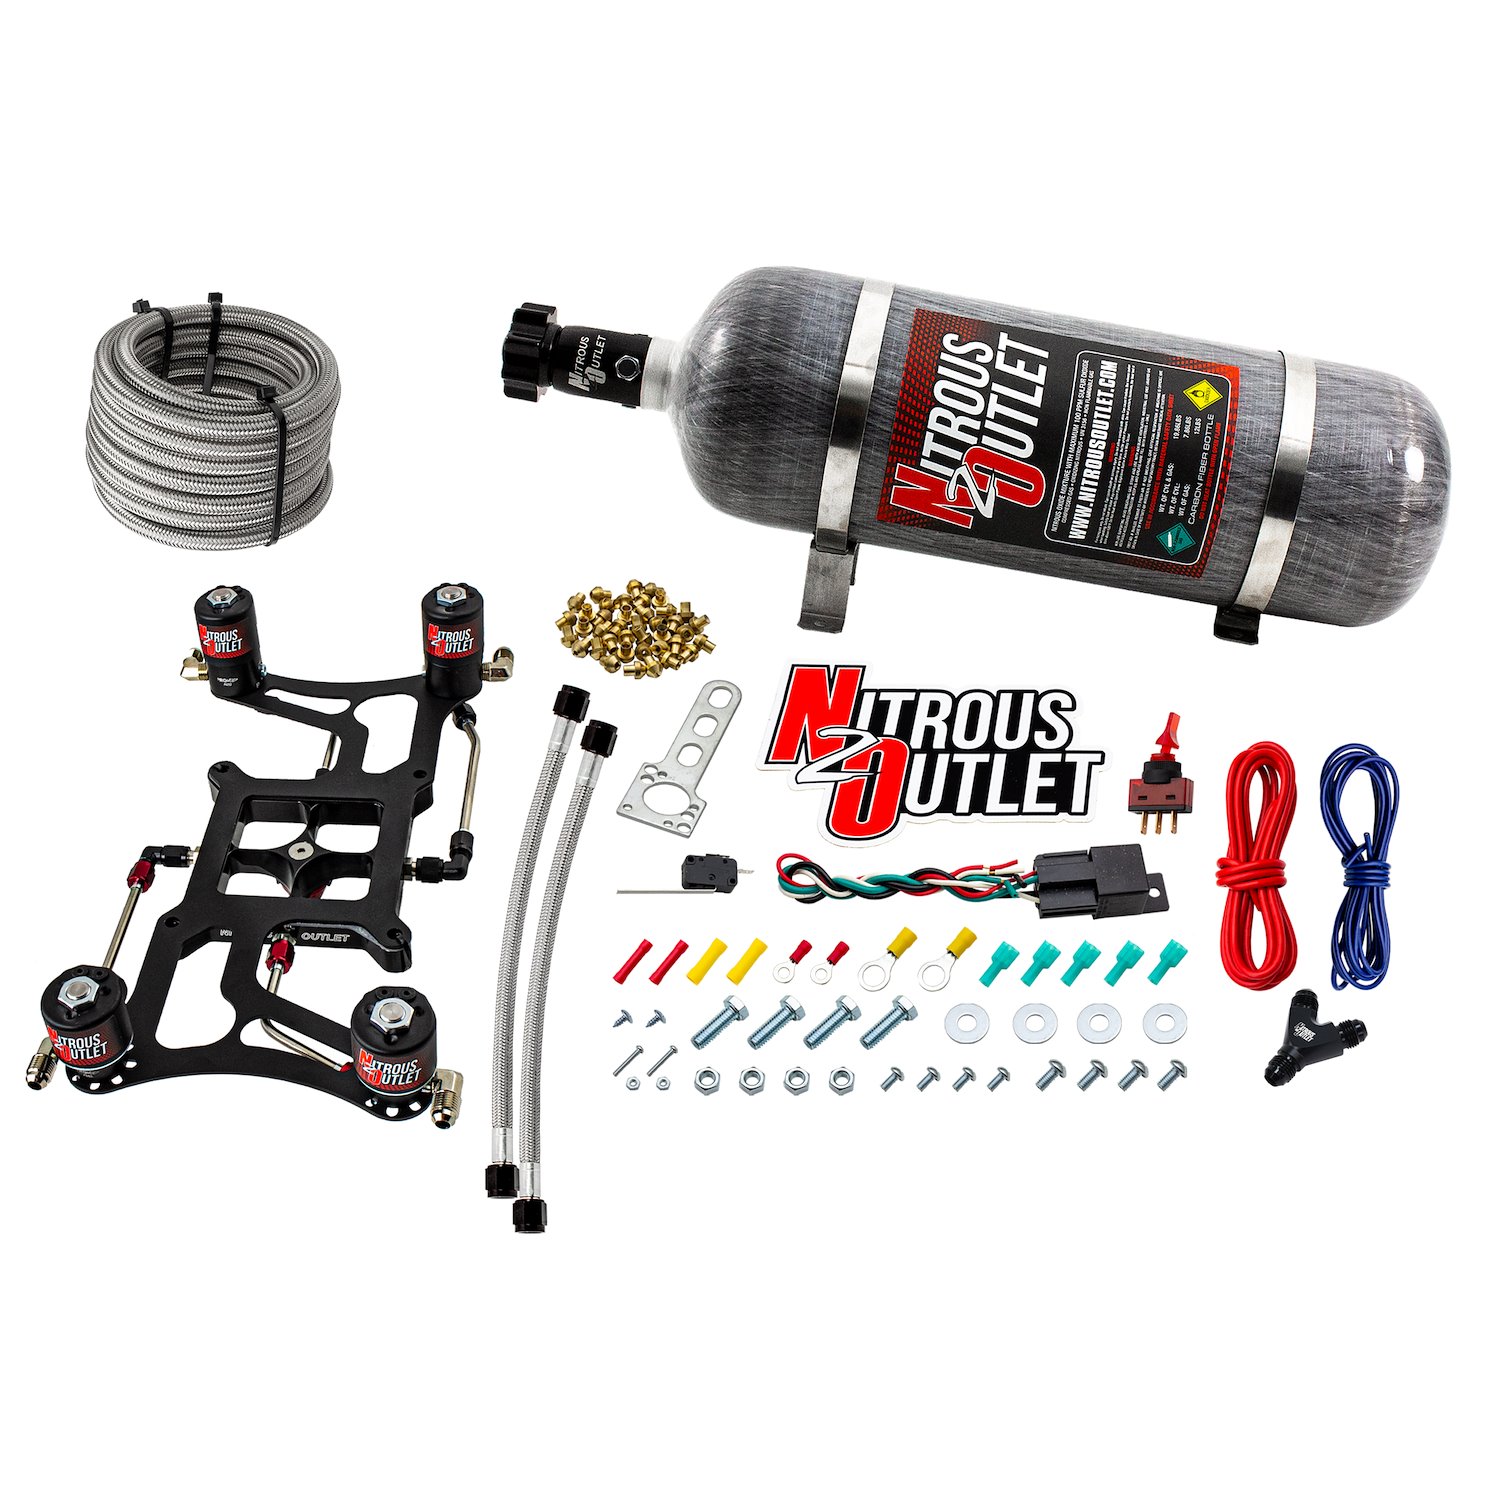 00-10628-12 4150 Hornet 2 Race Dual-Stage System, Hard-Line